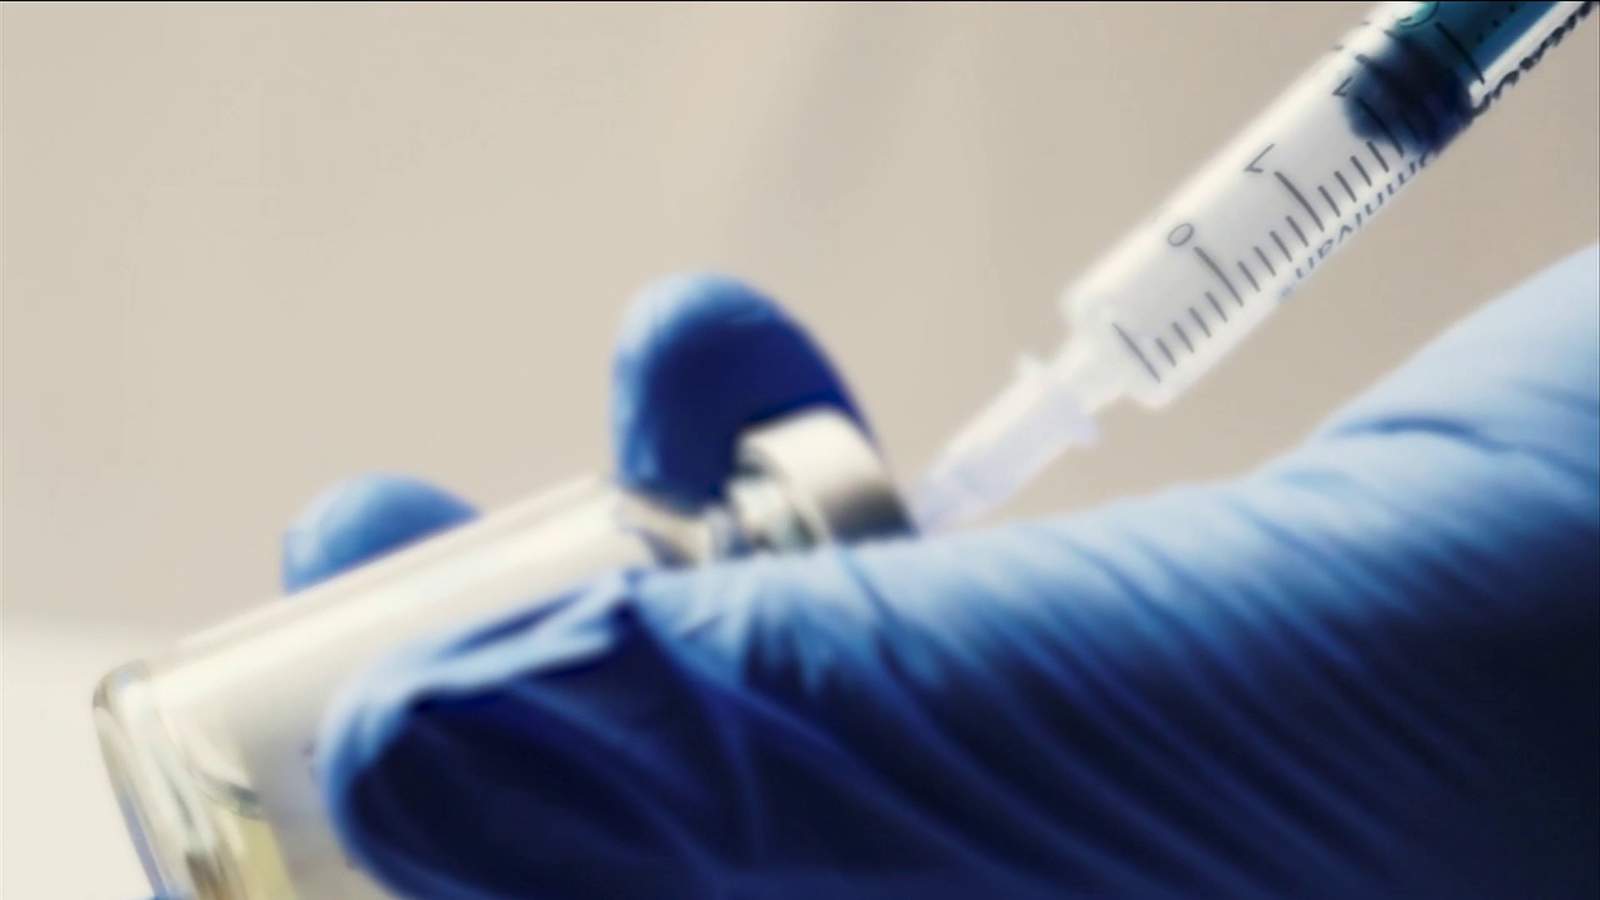 Jacksonville hospital says some requesting COVID-19 vaccine before its arrival